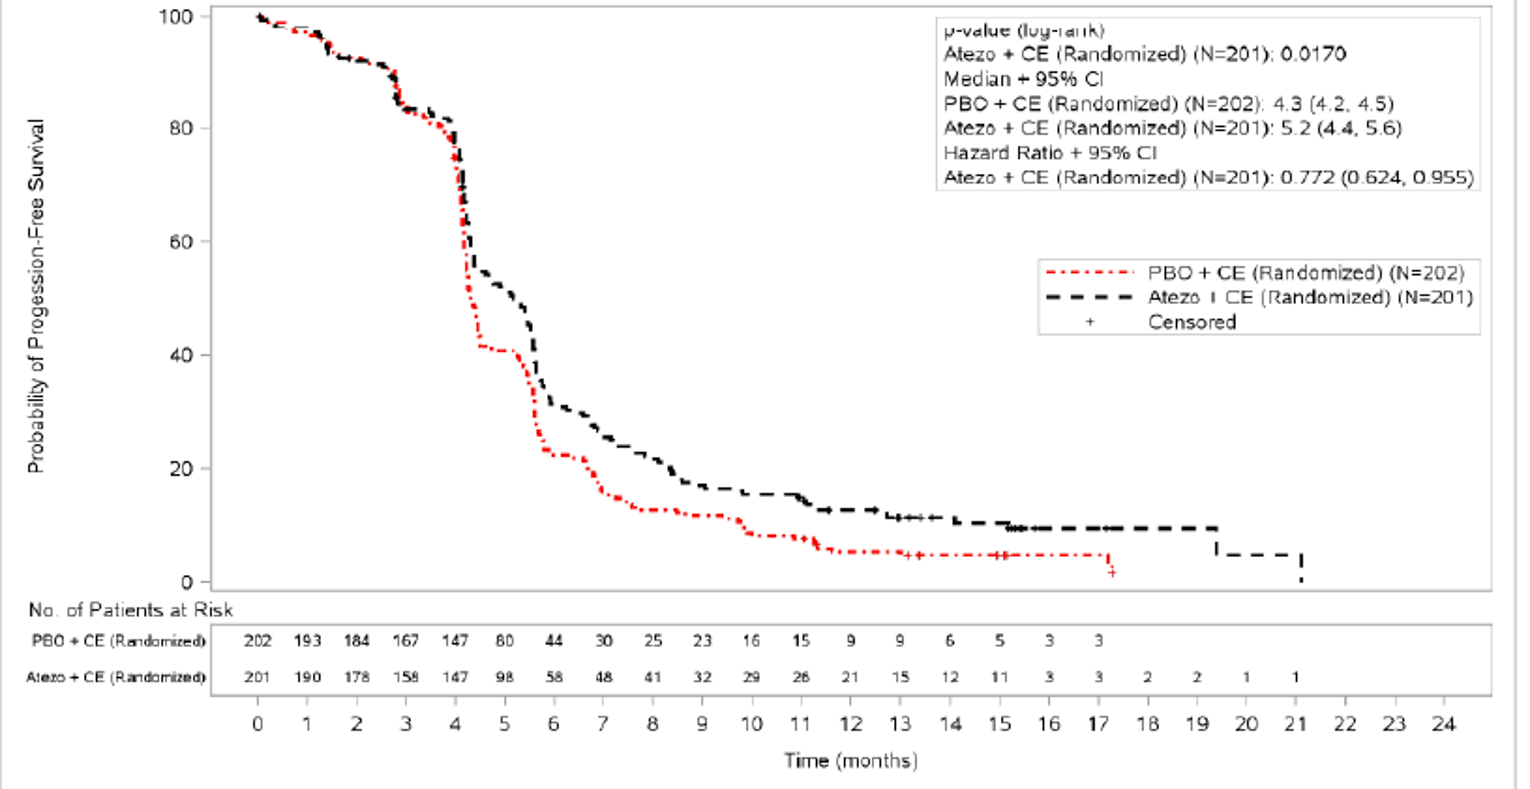 Kaplan–Meier curve for PFS with atezolizumab plus carboplatin and etoposide versus placebo plus carboplatin and etoposide, with the x-axis as time after treatment initiation in months and the y-axis as the probability of PFS and a follow-up duration of 21 months. The curves overlap until approximately 4 months. The curves begin to separate at 4 months, with the probability of PFS higher for atezolizumab plus carboplatin and etoposide